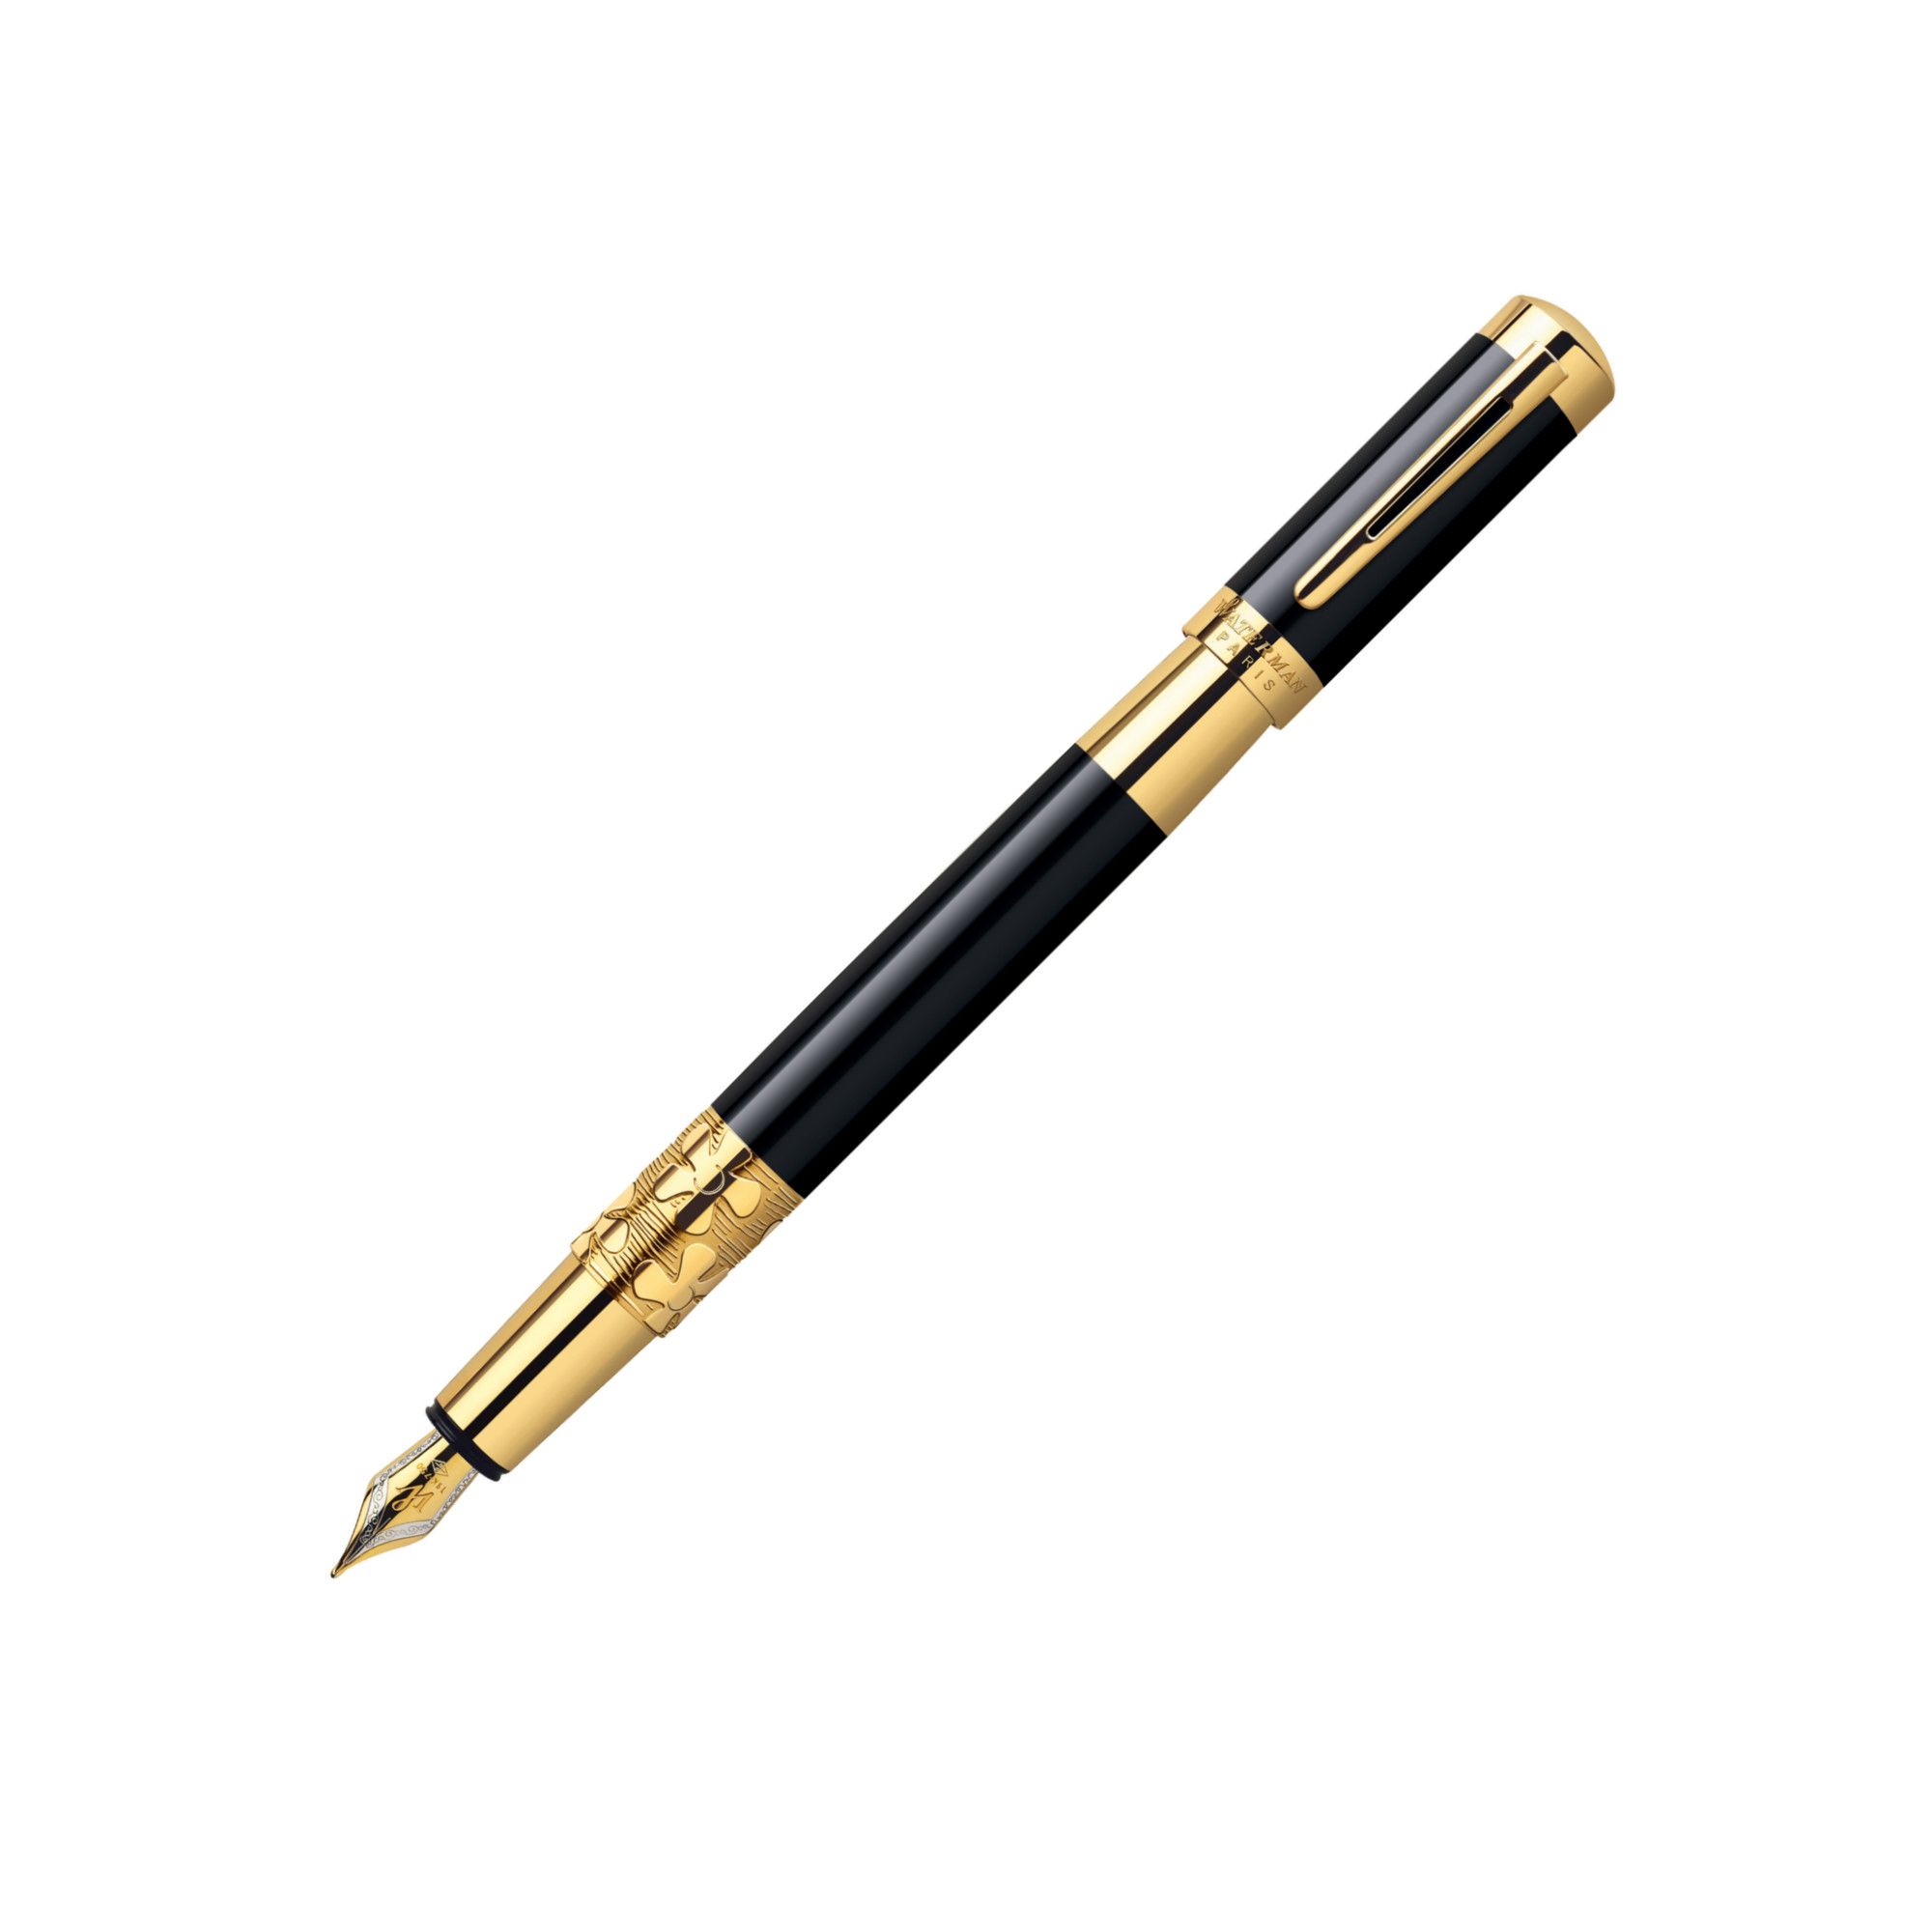 Waterman Elegance Black Lacquer and Gold Fountain Pen at Tesco Direct